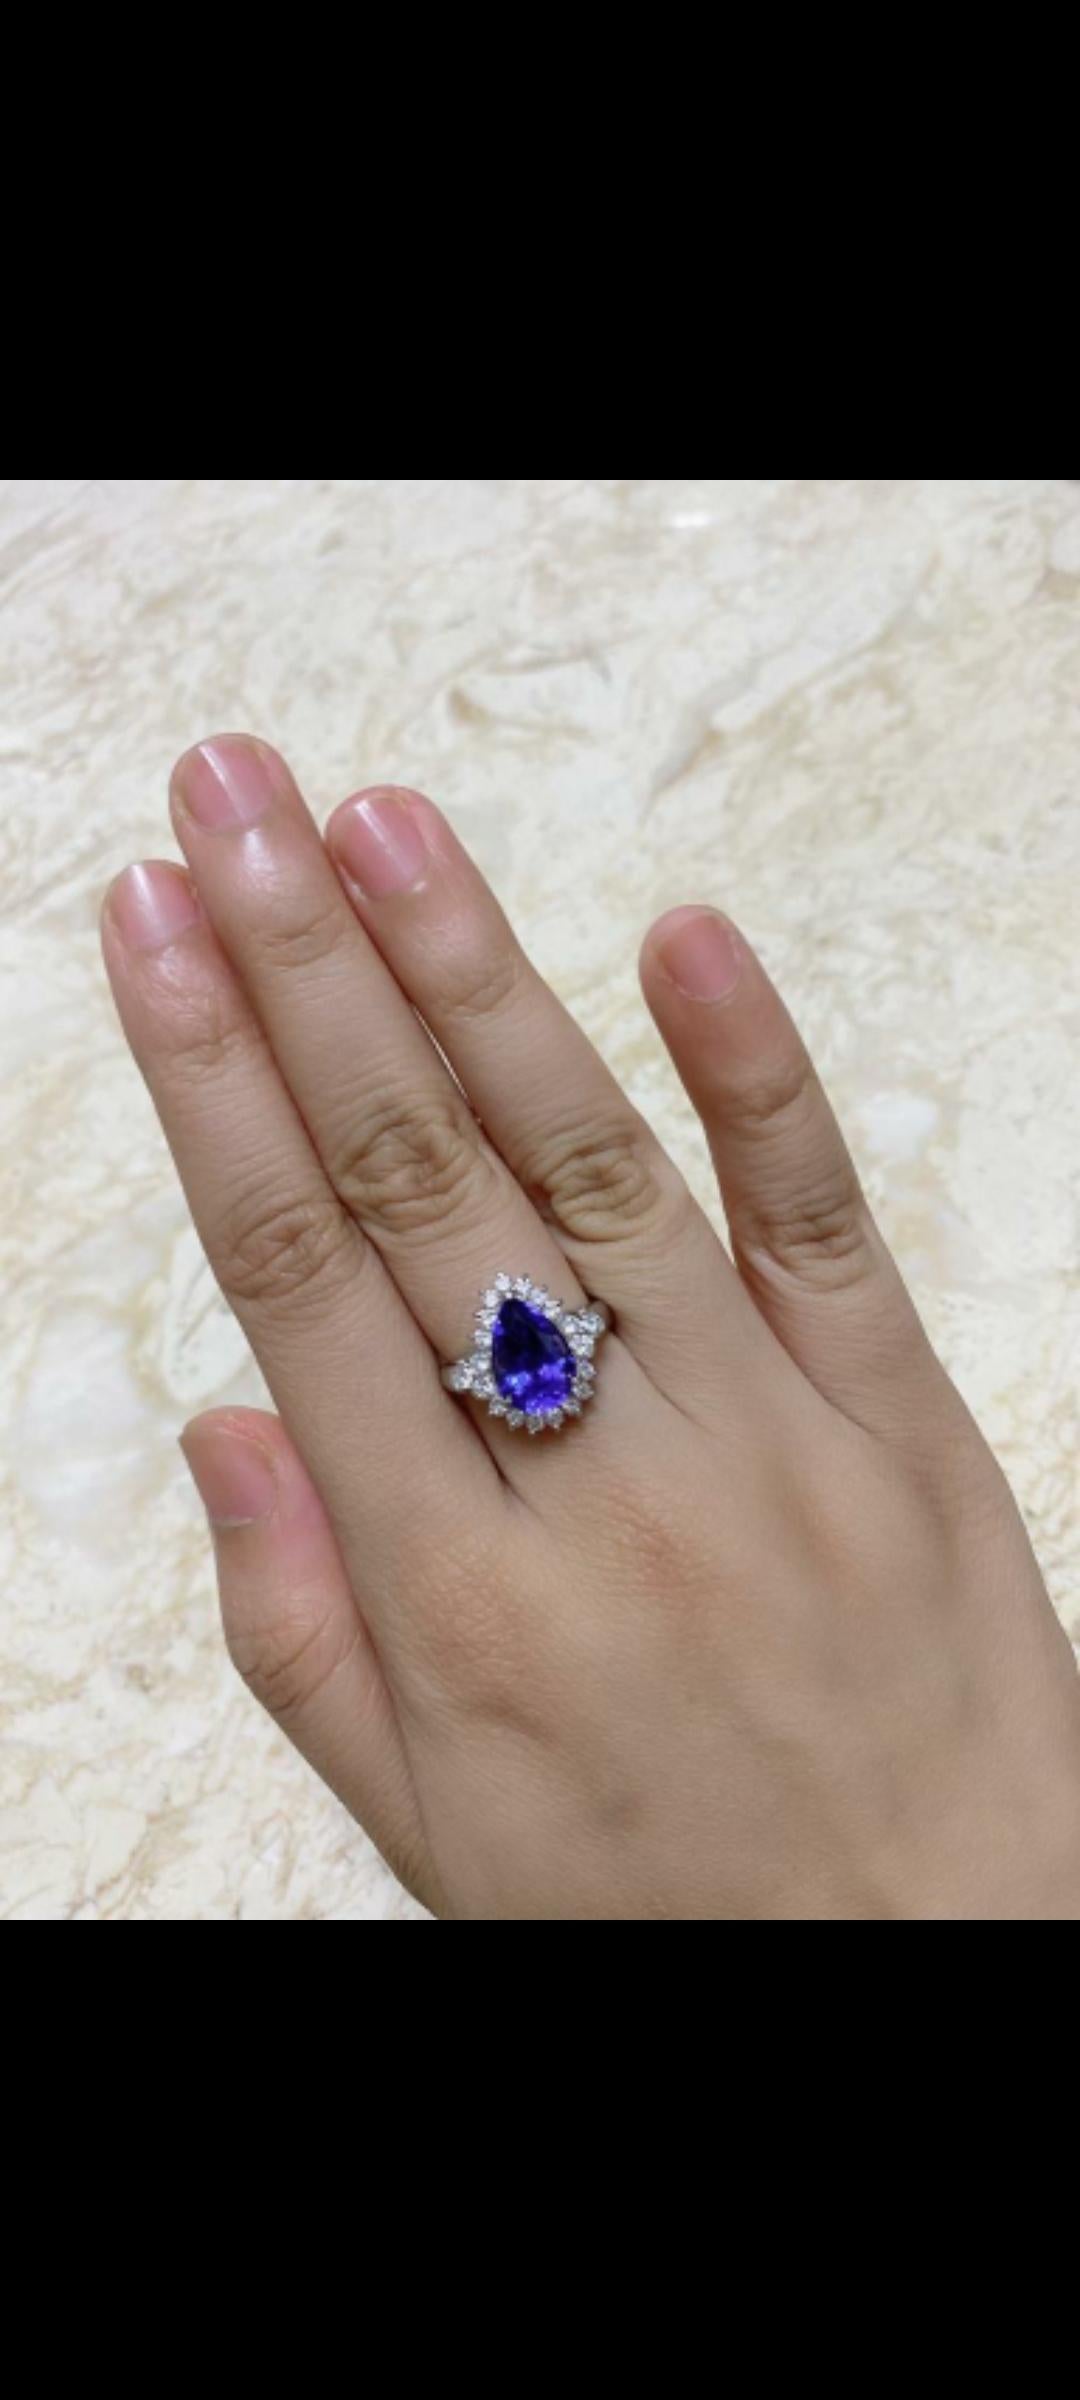 A beautiful and Elegant Tanzanite ring set in platinum PT900 with diamonds . The tanzanite weight is 3.00 carats and diamond weight is .70 carats in the ring. The ring dimensions in cm 1.5 x 1.5 x 2.5 (LXWXH). US size 7